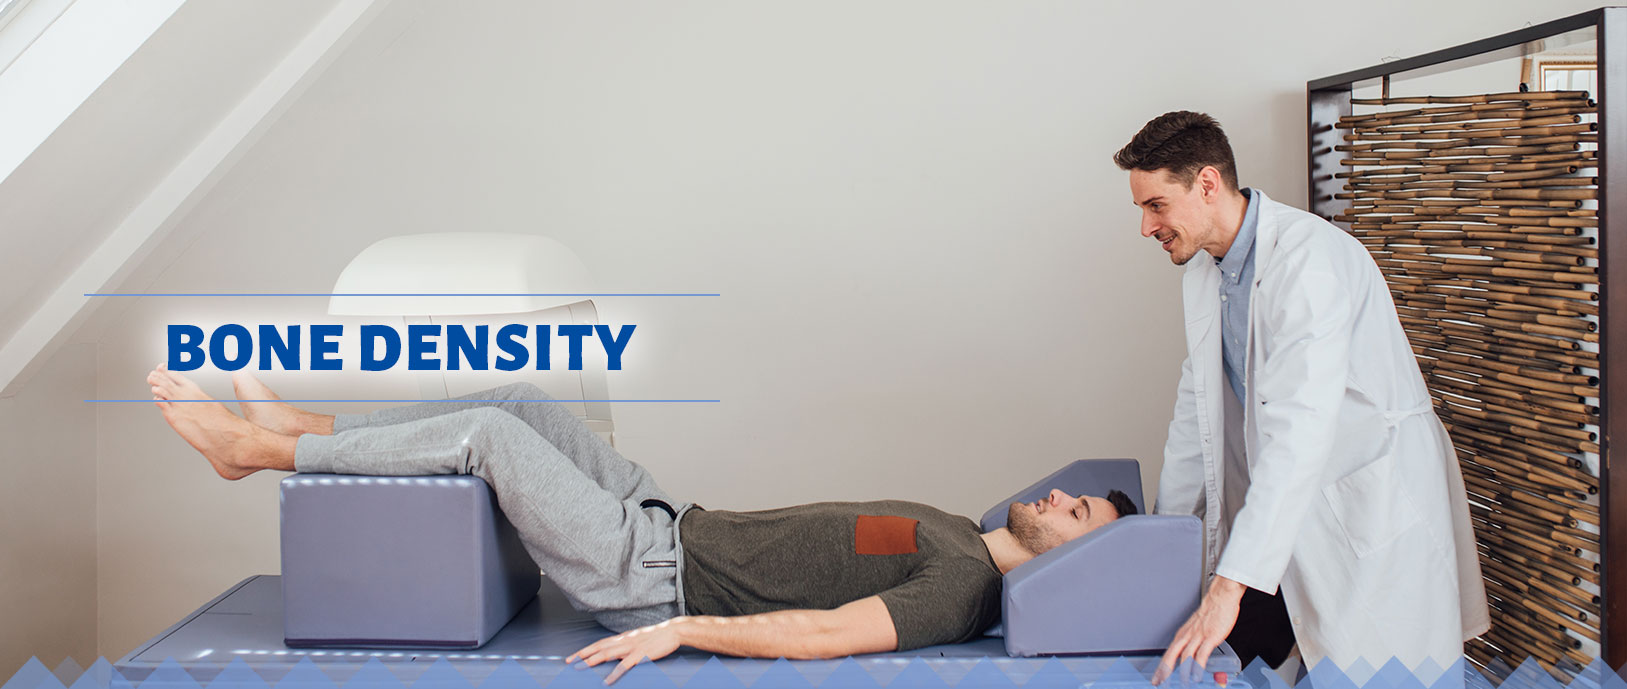 Bone density: a patient is lying on a flat surface with his legs elevated and propped onto a cushion. A bone density machine is focused above his legs and is being observed by ta smiling physician, who is at the head of the patient.